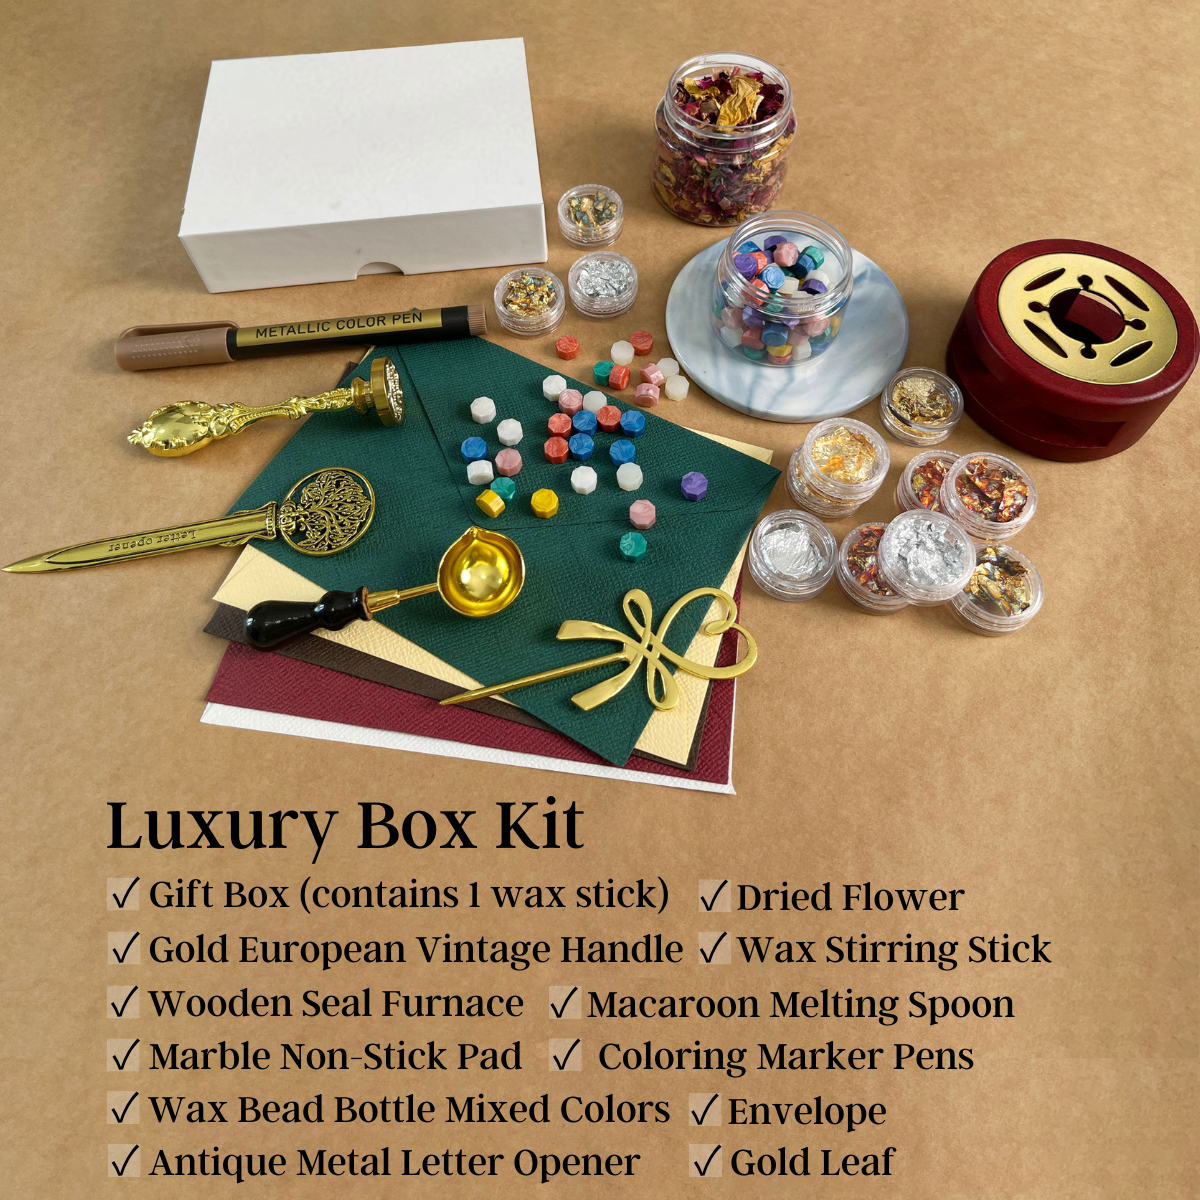 Party 2 Wax Seal Stamp (9 Designs)